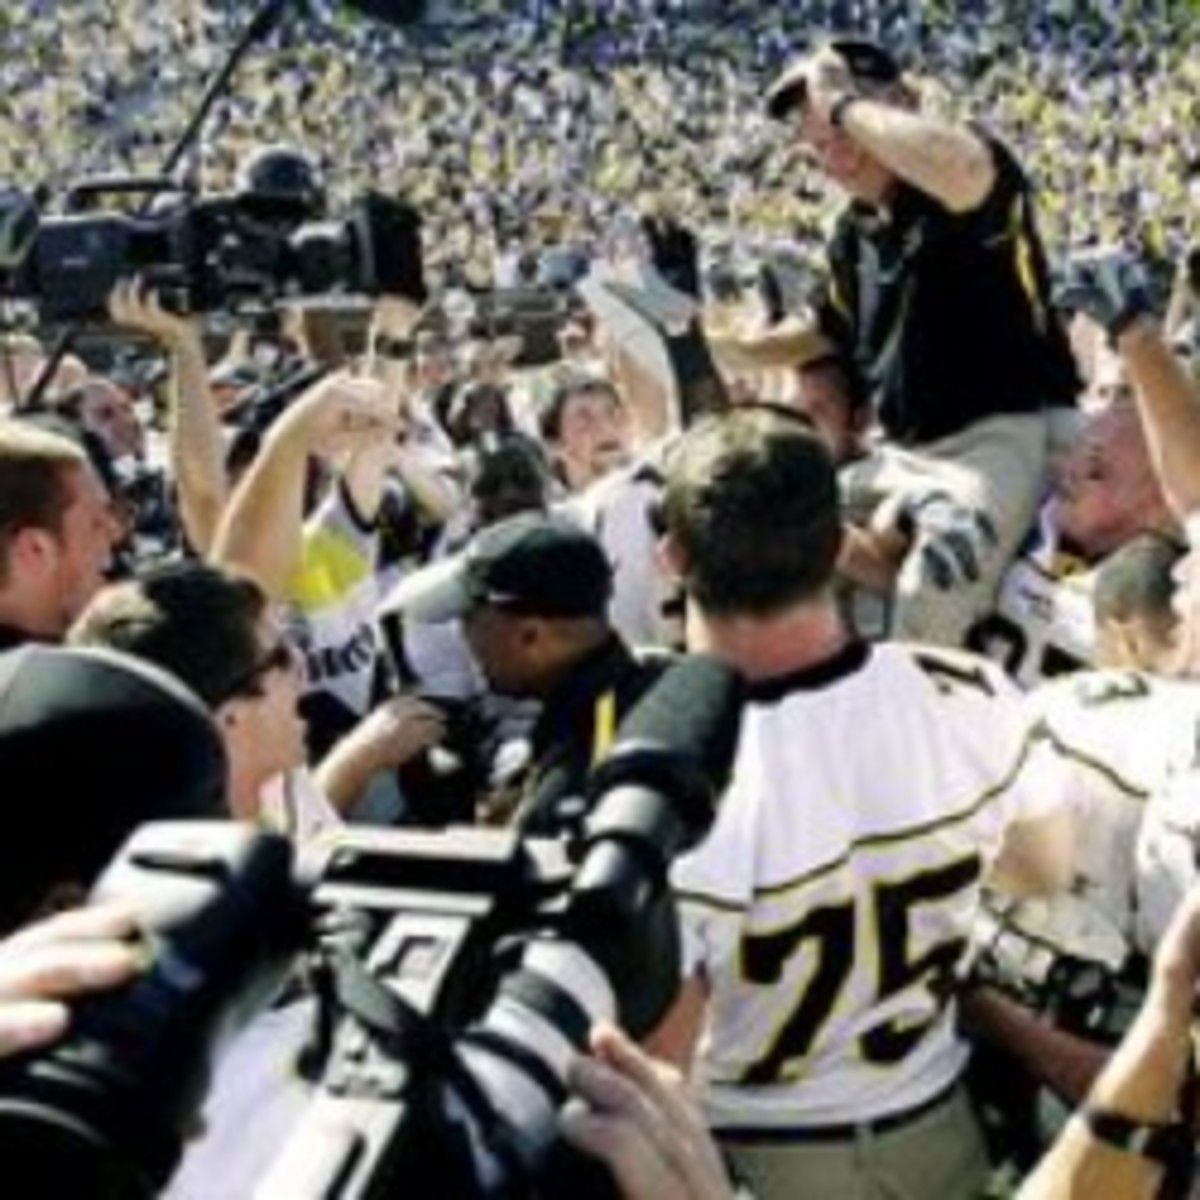 Big Ten fans surely don't want to see scenes like Appalachian State's victory over Michigan in 2007. (AP Photo by Duane Burleson)